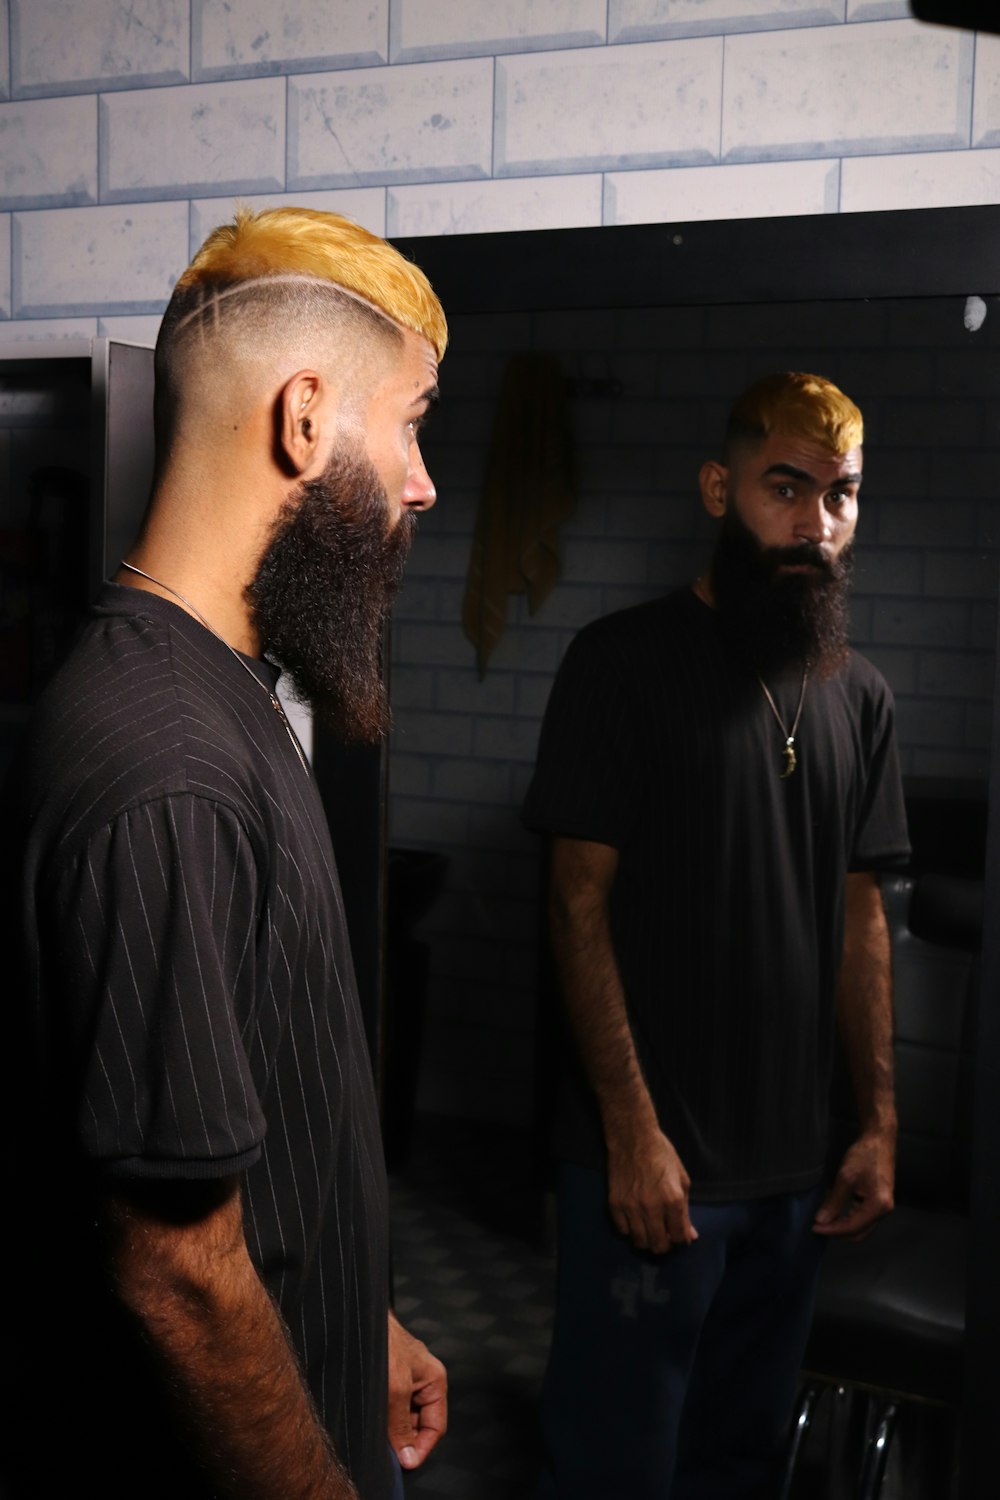 a man with a long beard and a bald head standing in front of a mirror